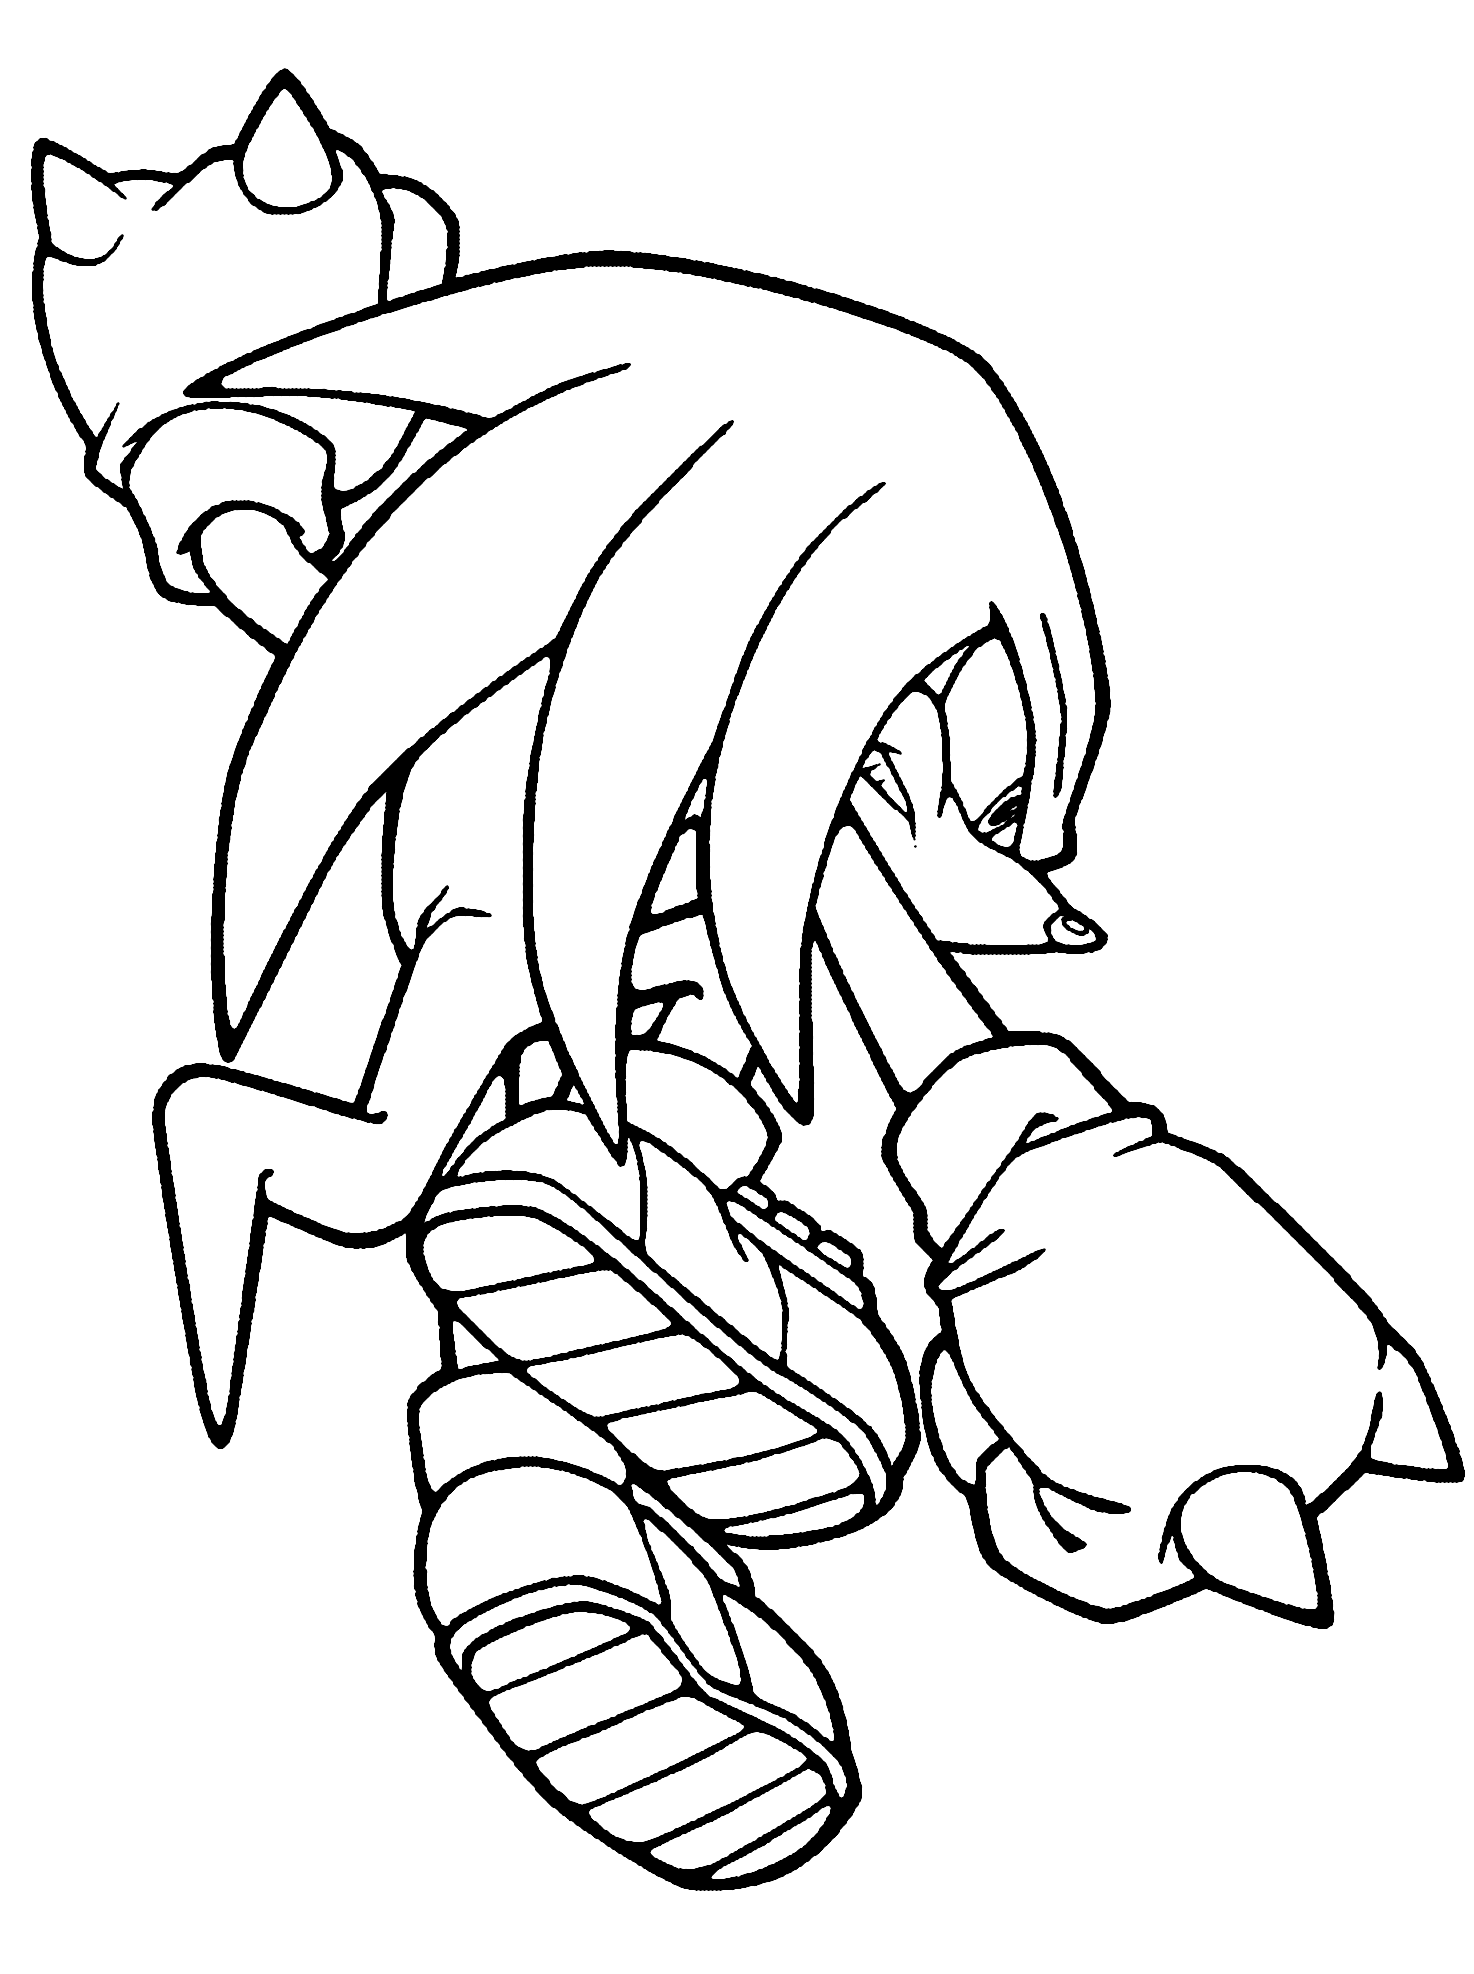 Coloring page Knuckles